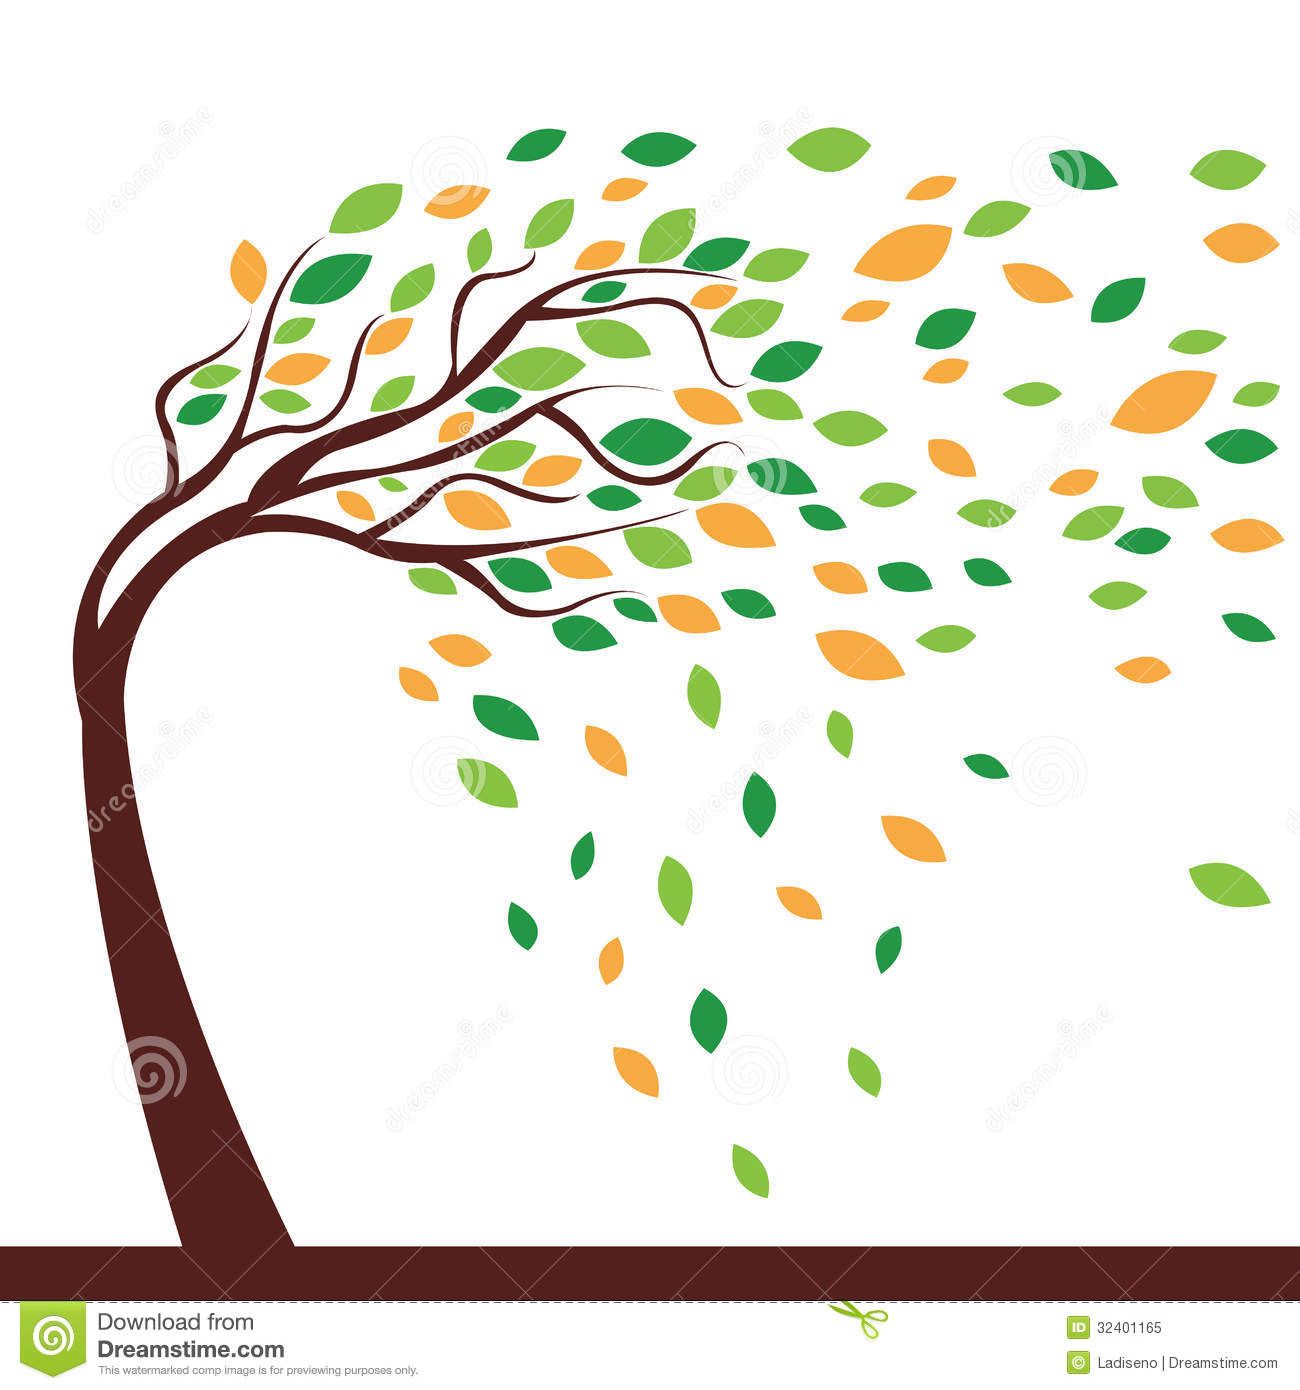 Image result for windy tree clipart.